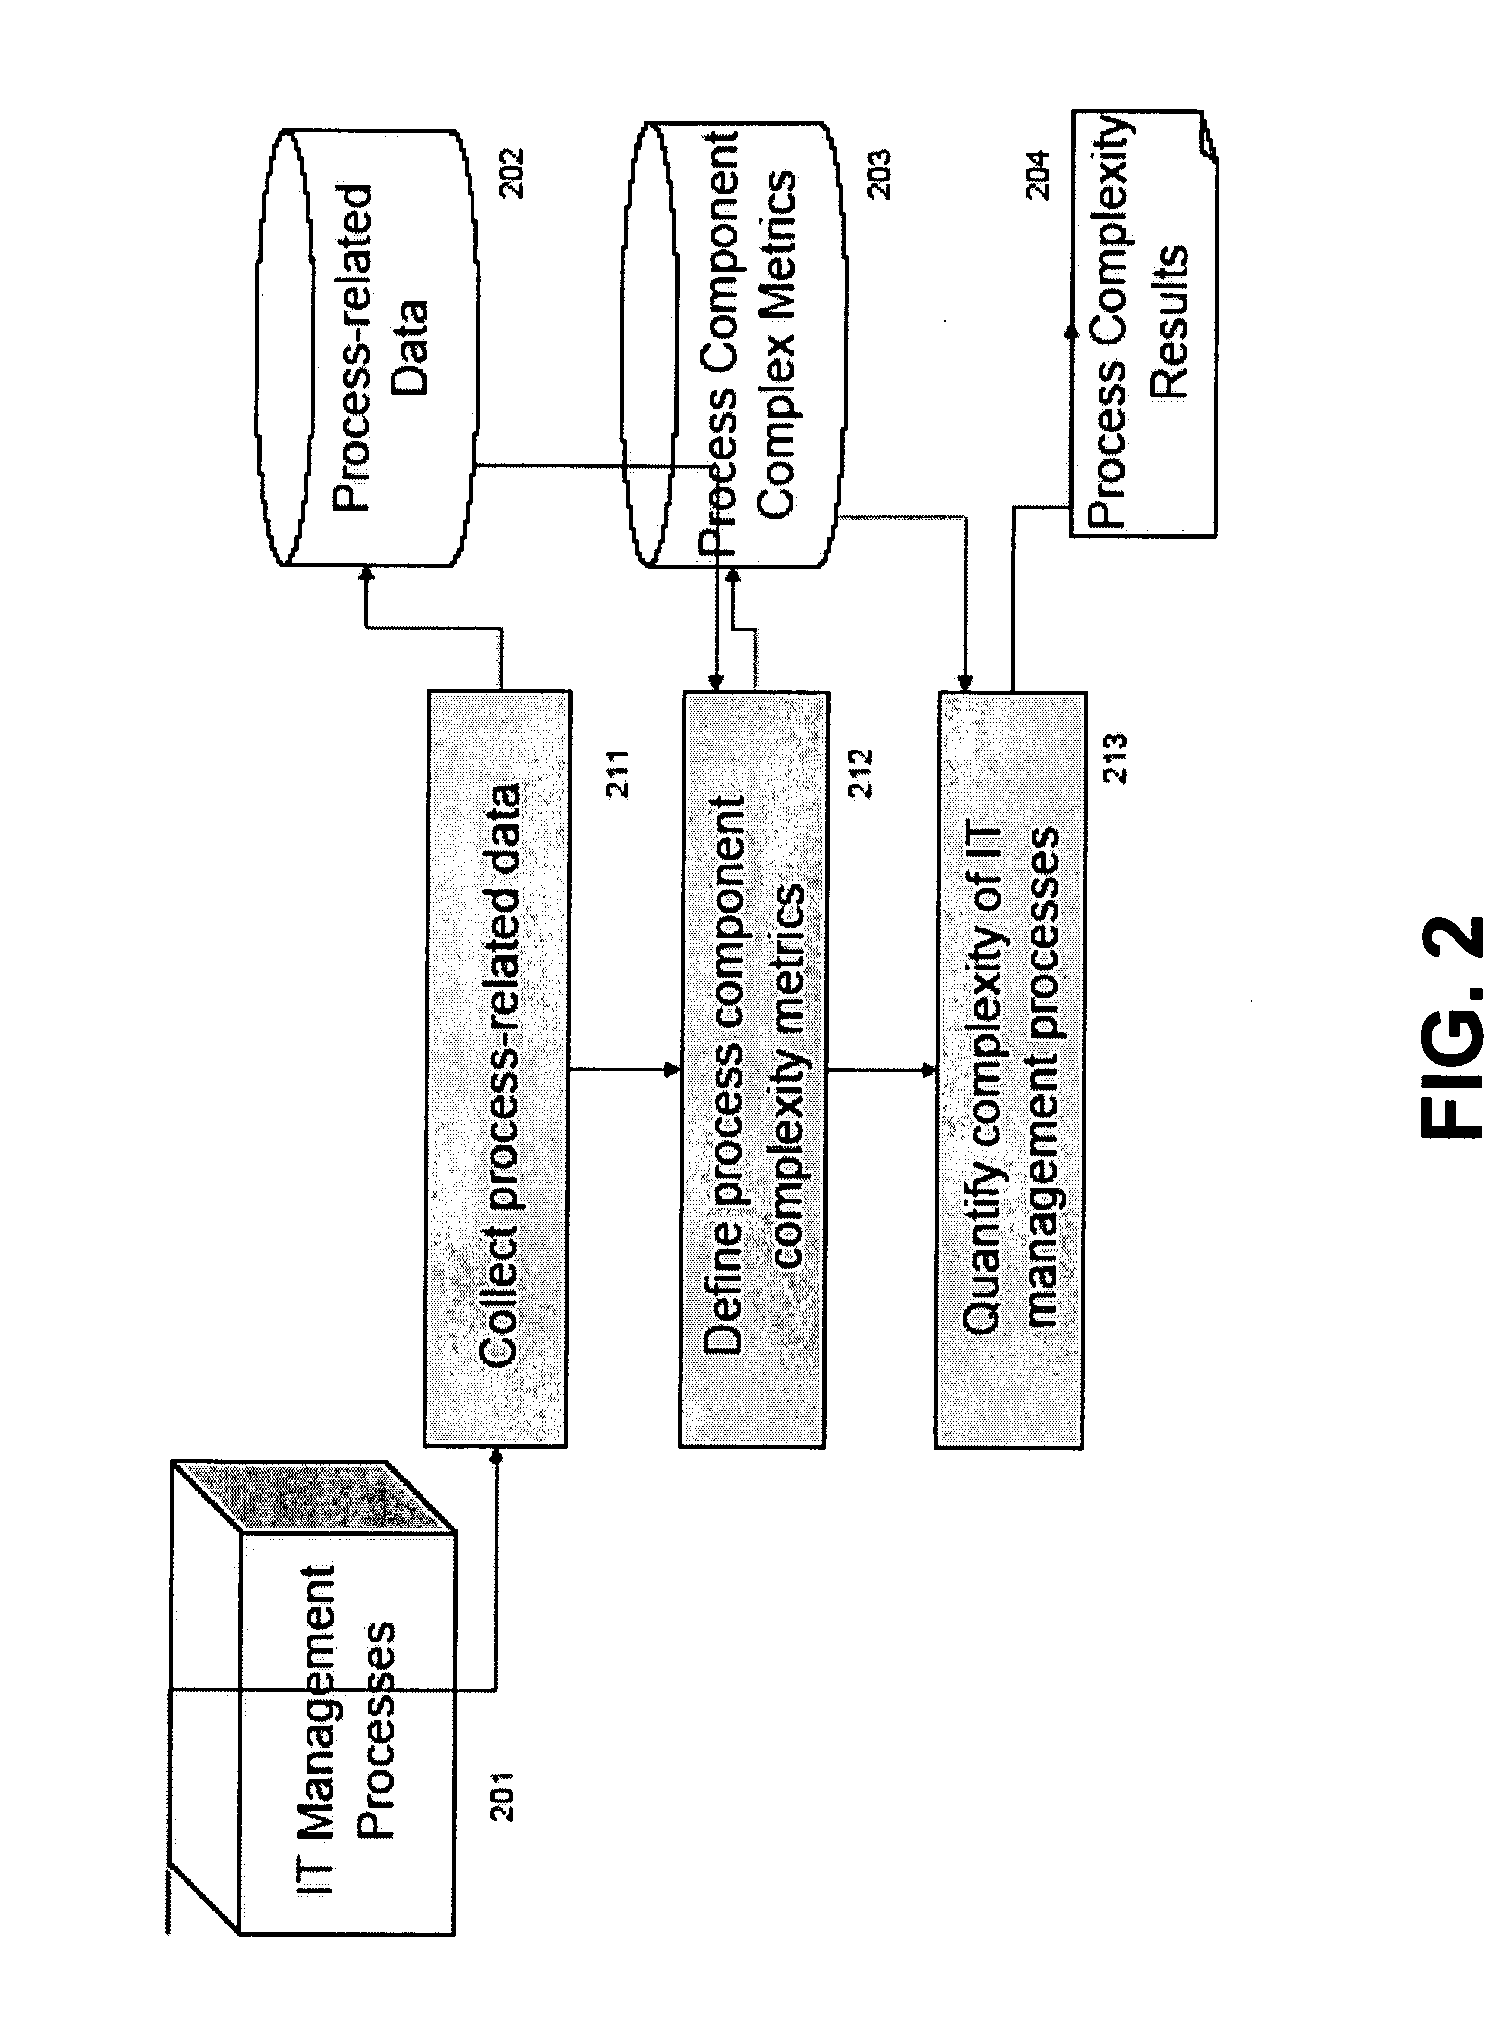 Method and apparatus for quantifying complexity of information